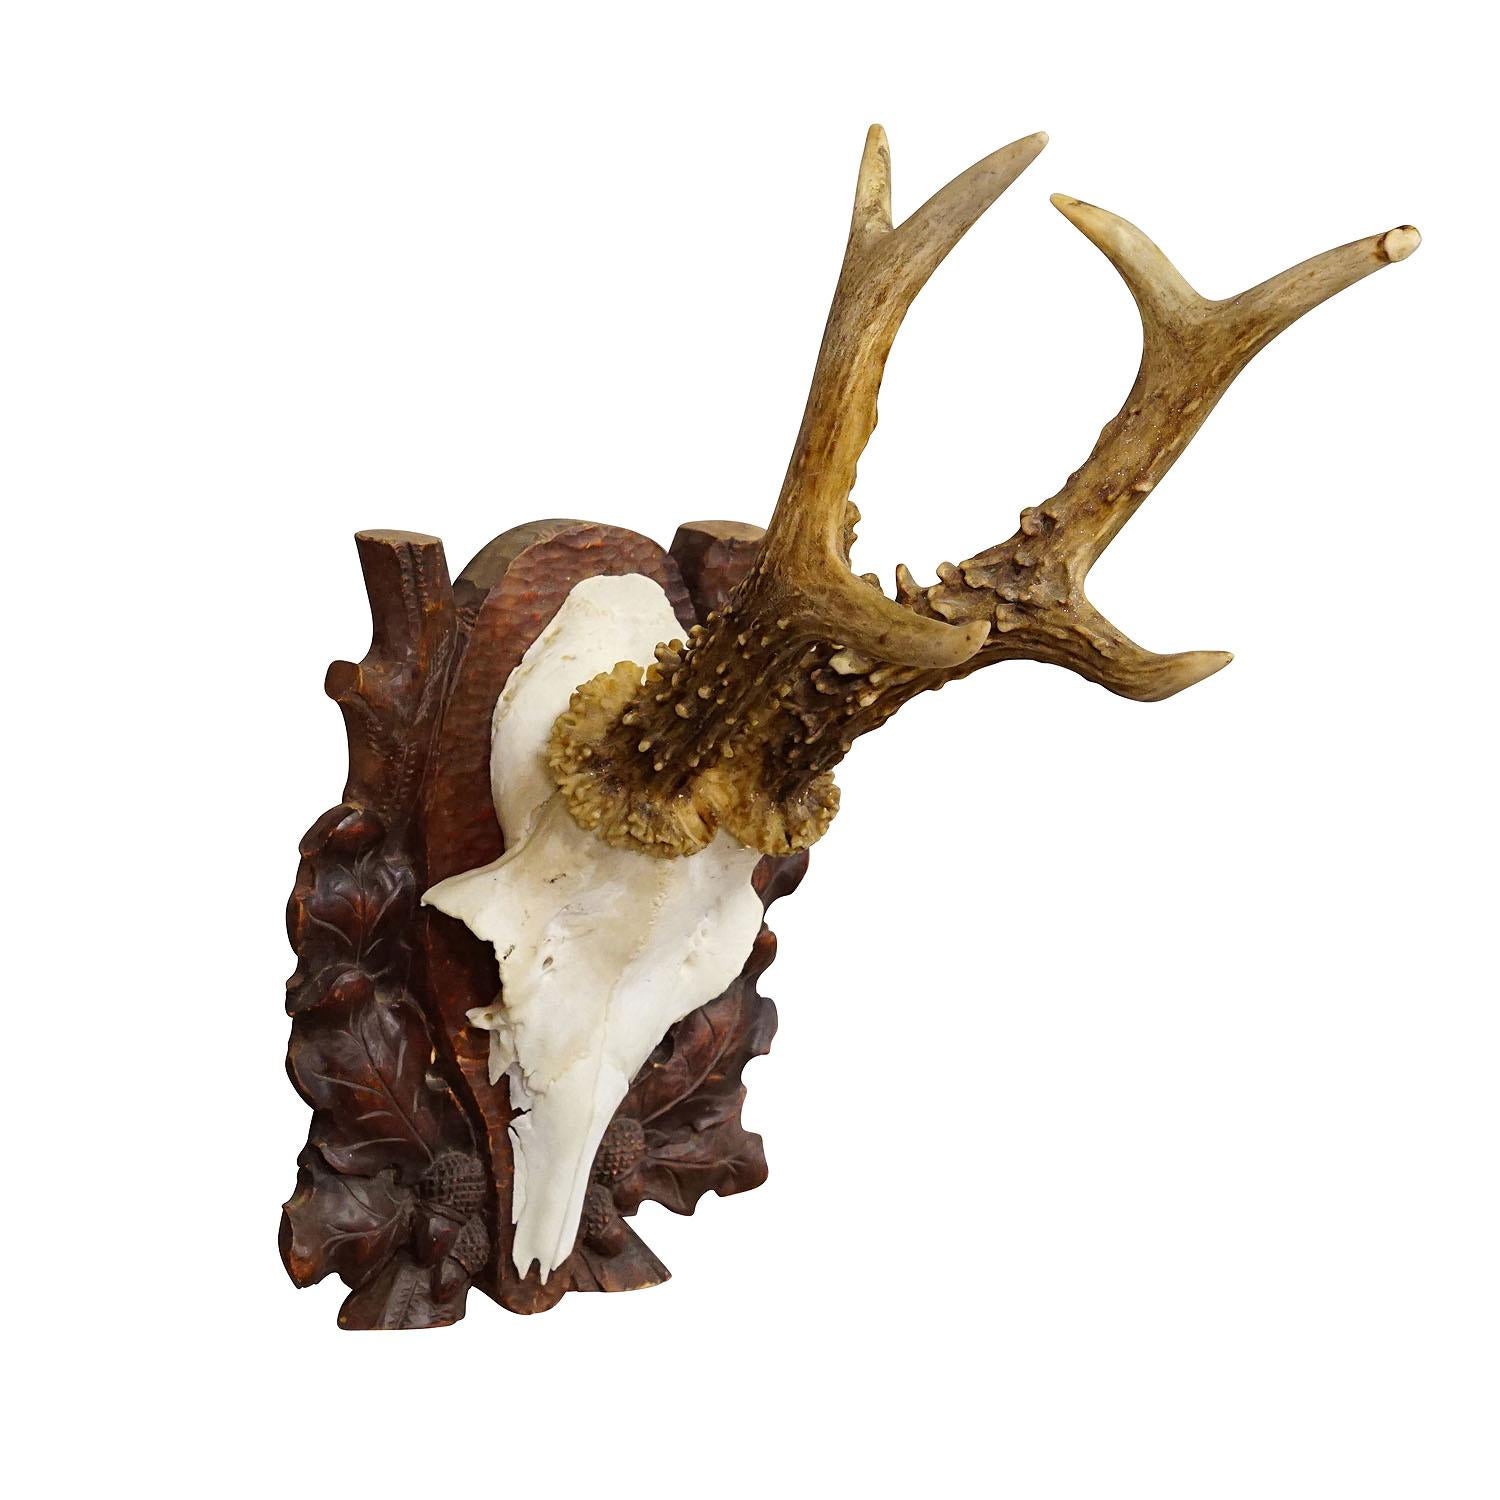 Black Forest Deer Trophy on Carved Wooden Plaque ca. 1900s

A large antique deer (Capreolus capreolus) trophy on a wooden carved plaque with dark brown finish. The trophy was shot in the early 20th century. Good condition.

Trophies are mementos